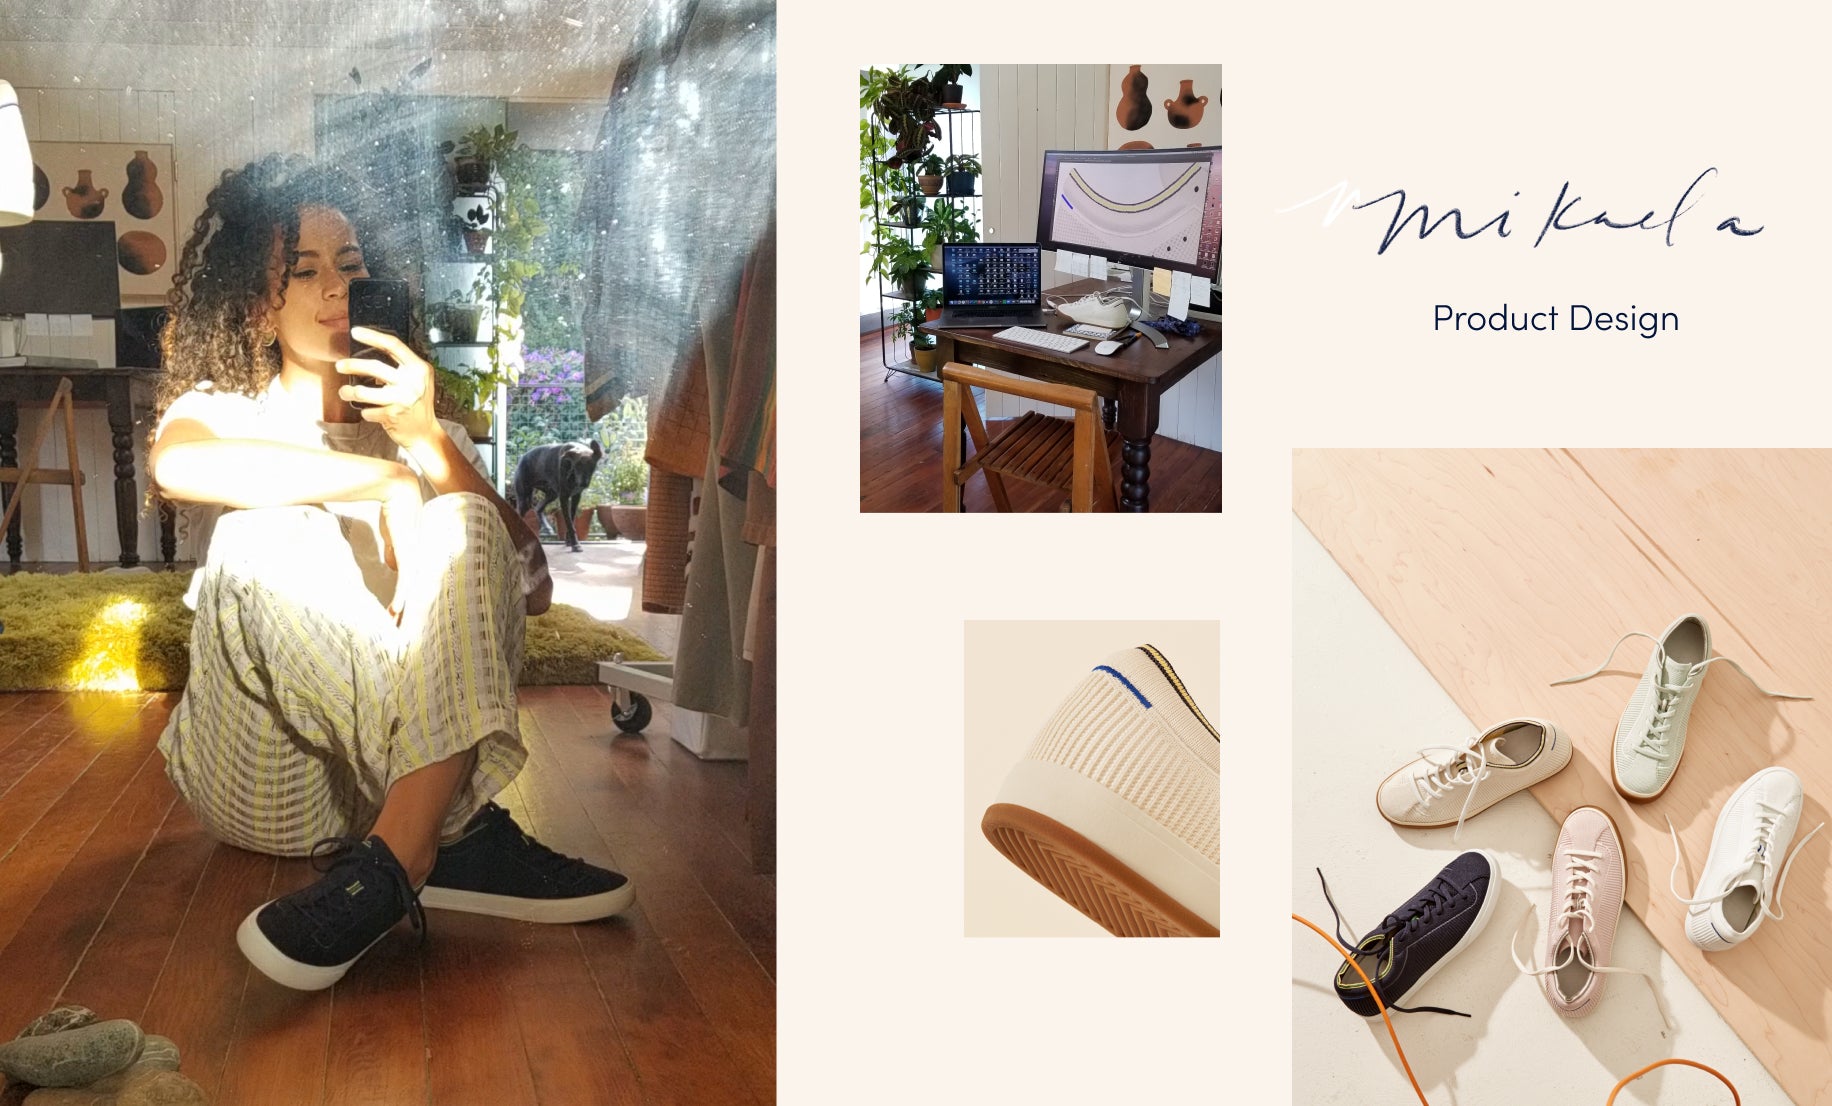 Image with the text “Mikaela—product design”, with a collage of images showing her workstation, her wearing The Lace Up in Navy,  the heel design detail of The Lace Up, and an assortment of lace up sneaker colors. 